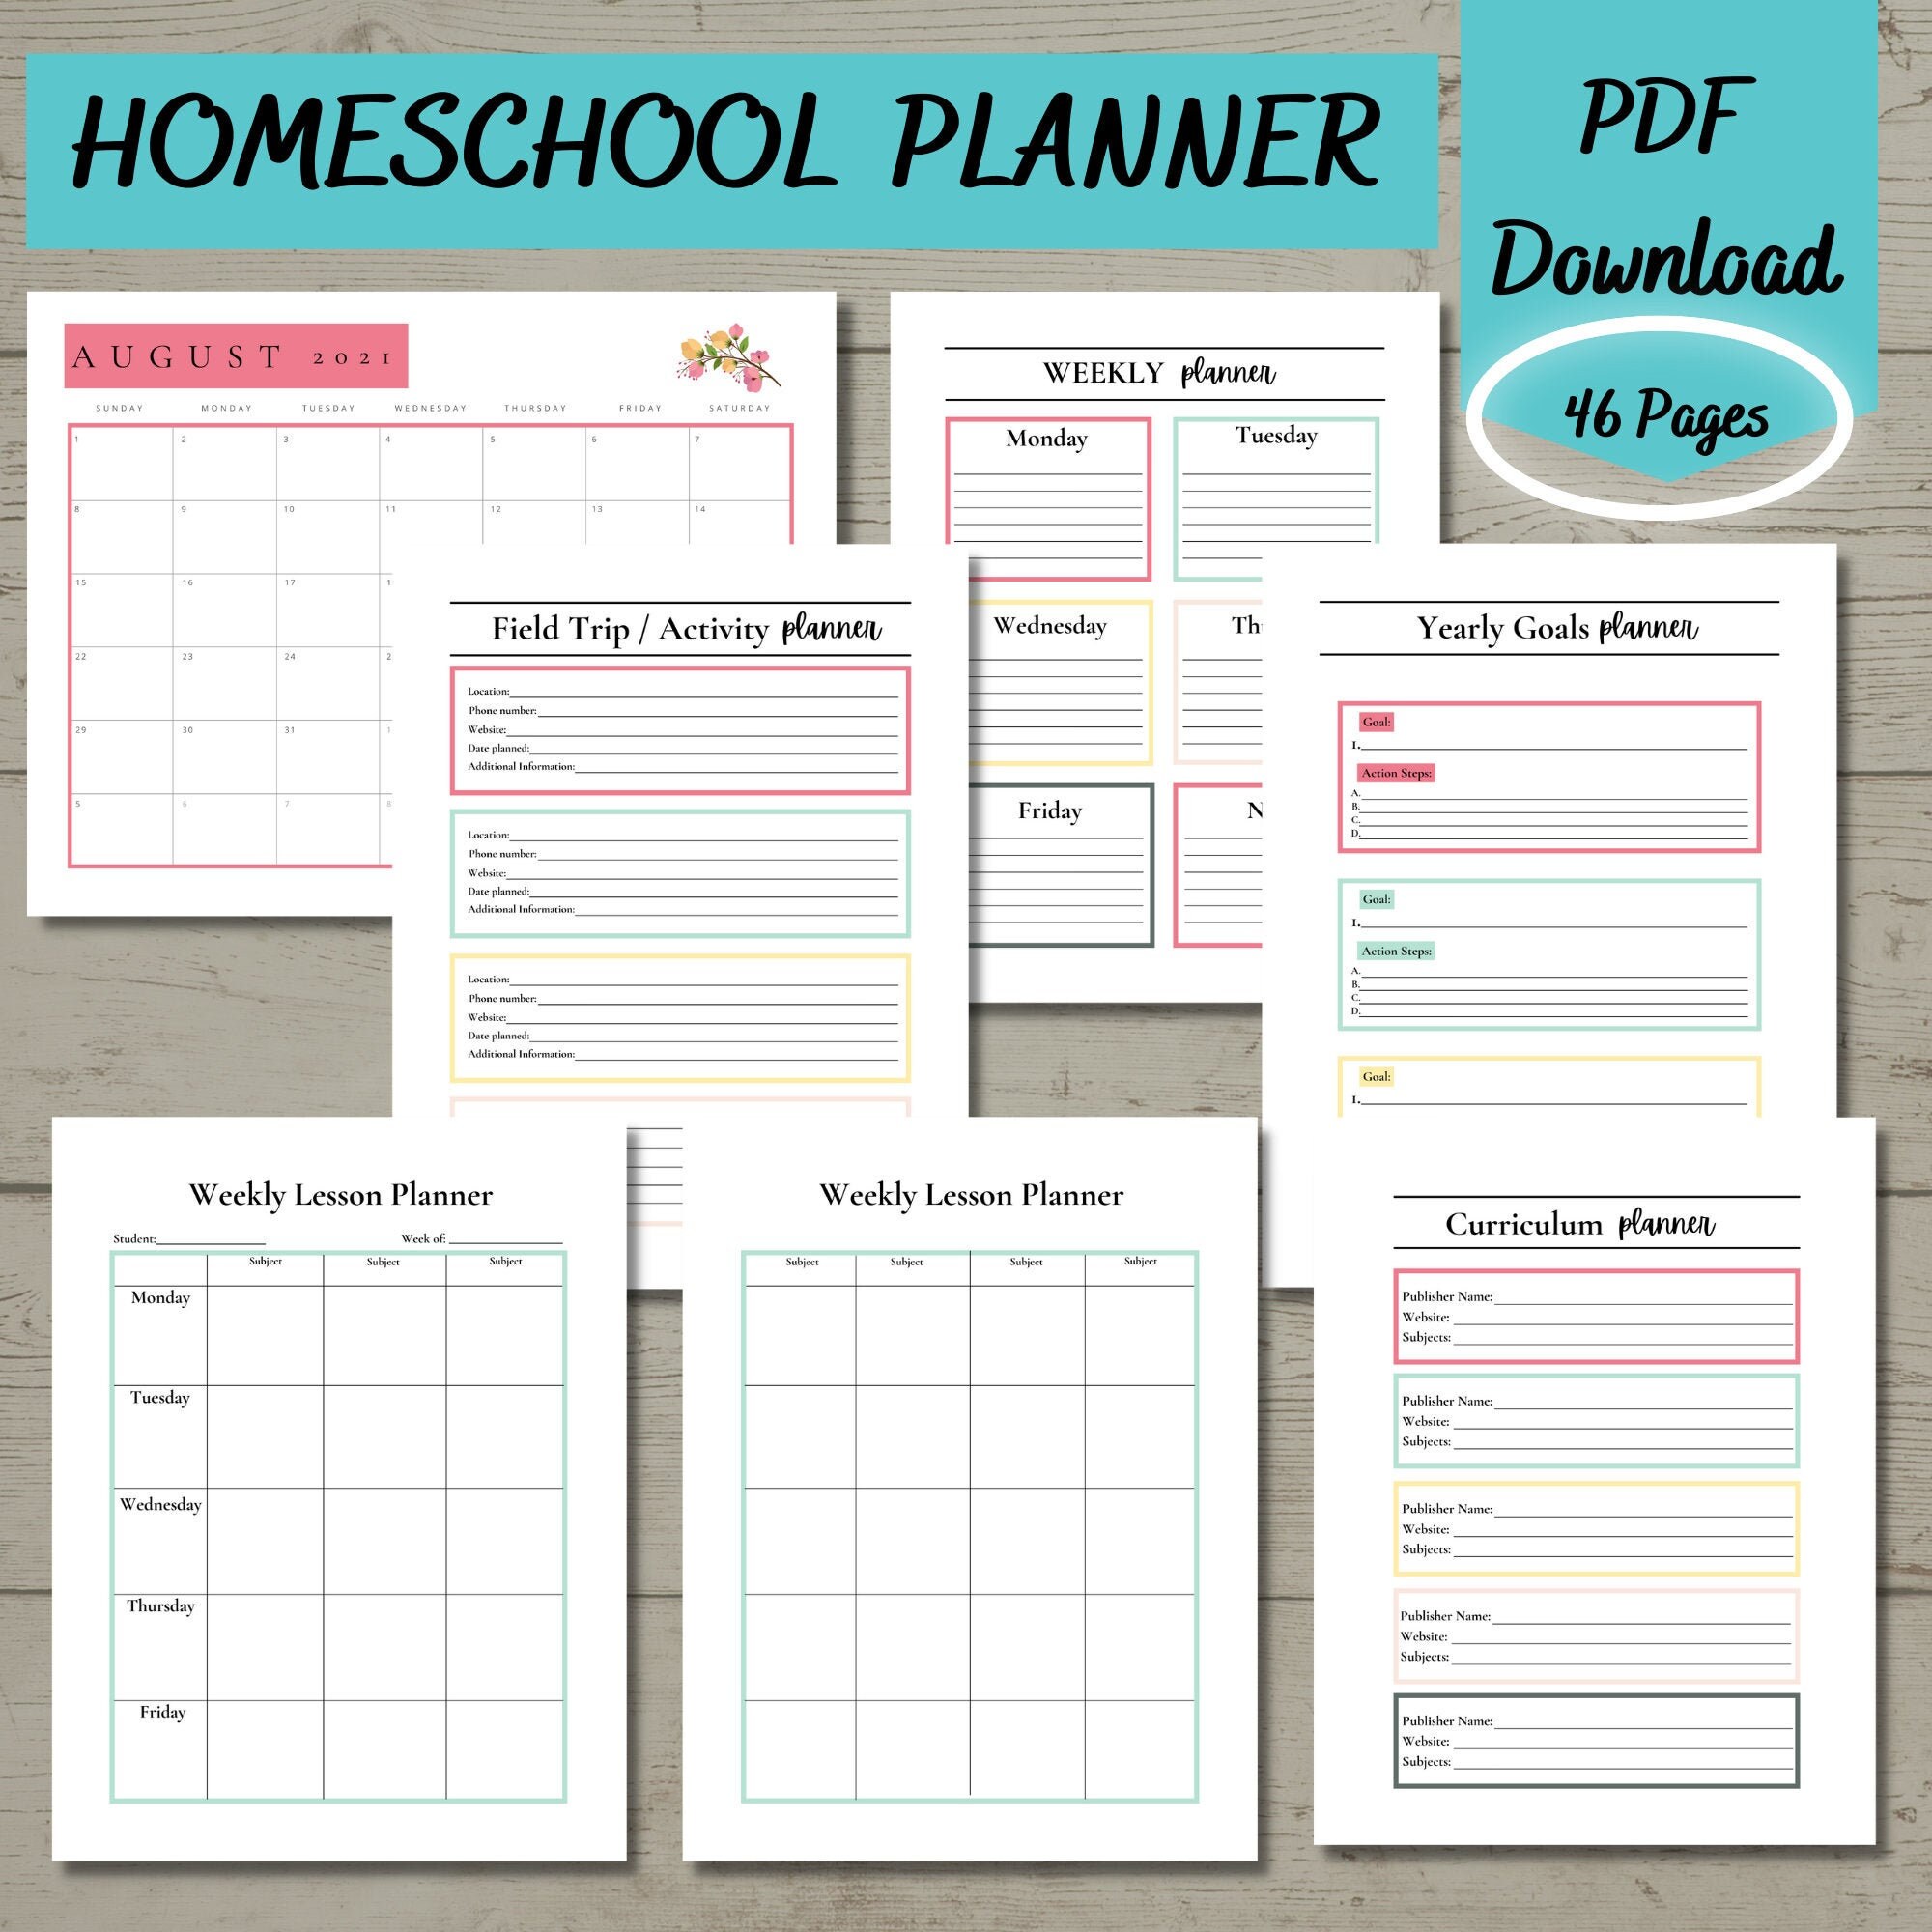 Daily Planner Goal Planner PDF 8.5 x 11 Inch Printable Planner 29 Pages Monthly Calendar Medical Information Meal Planner